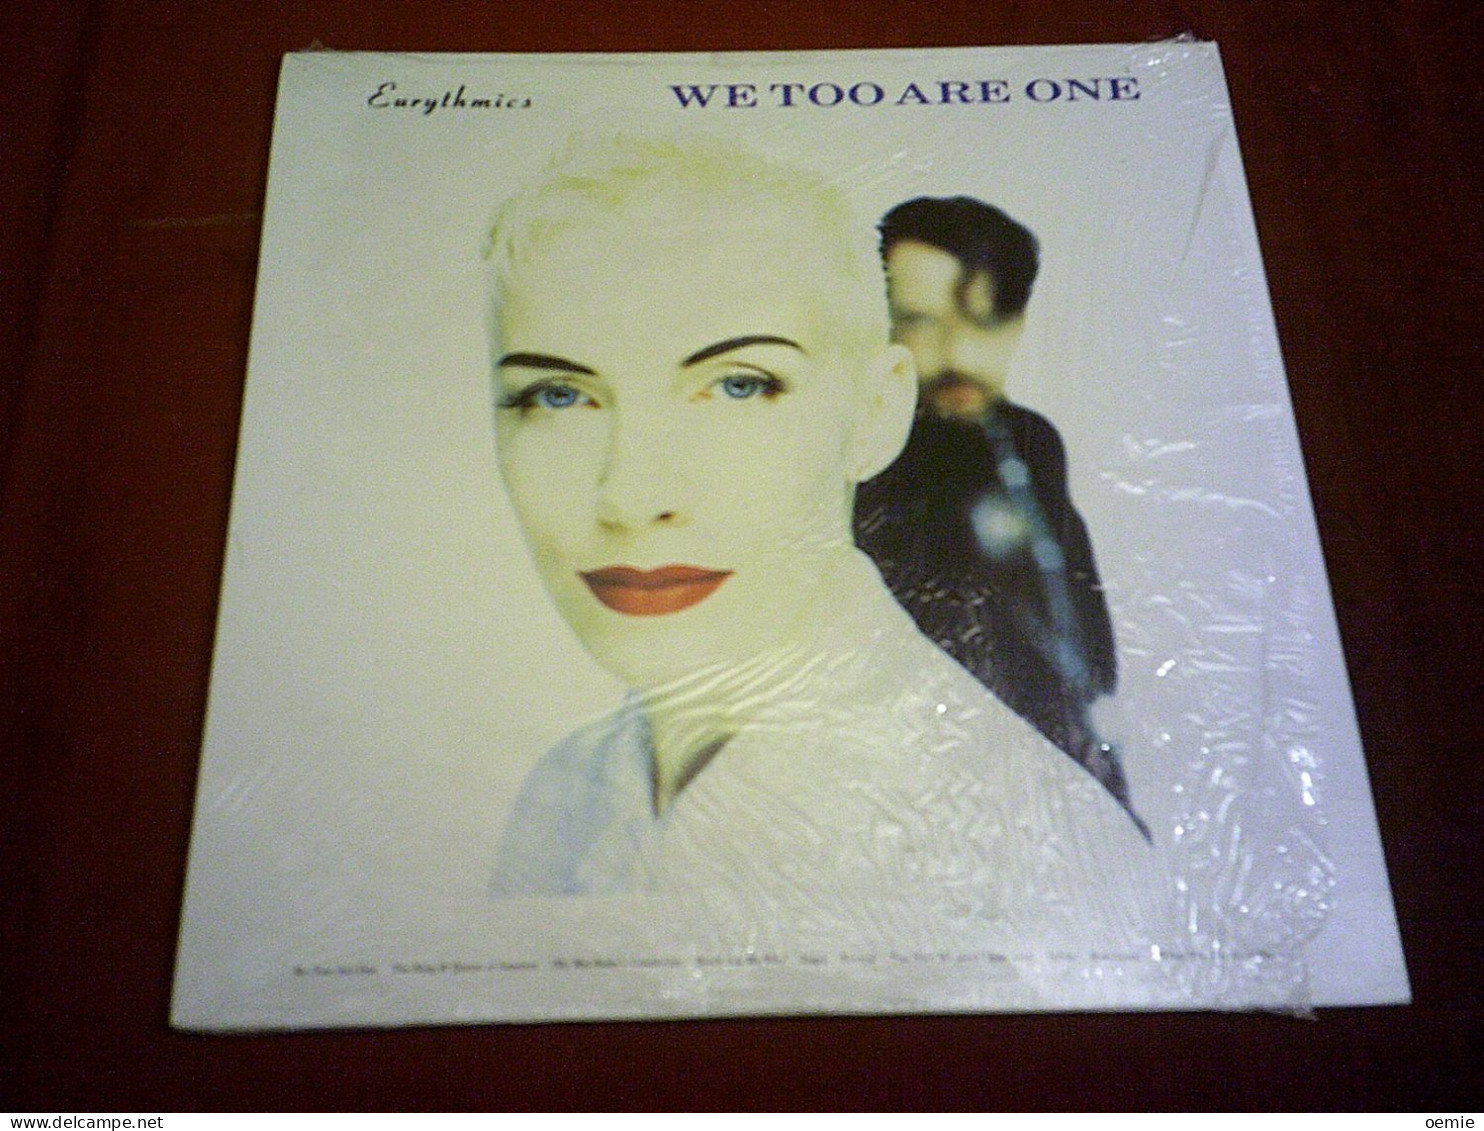 EURYTHMICS  ° WETOO ARE ONE  °  PRESSAGE CANADA - Other - English Music